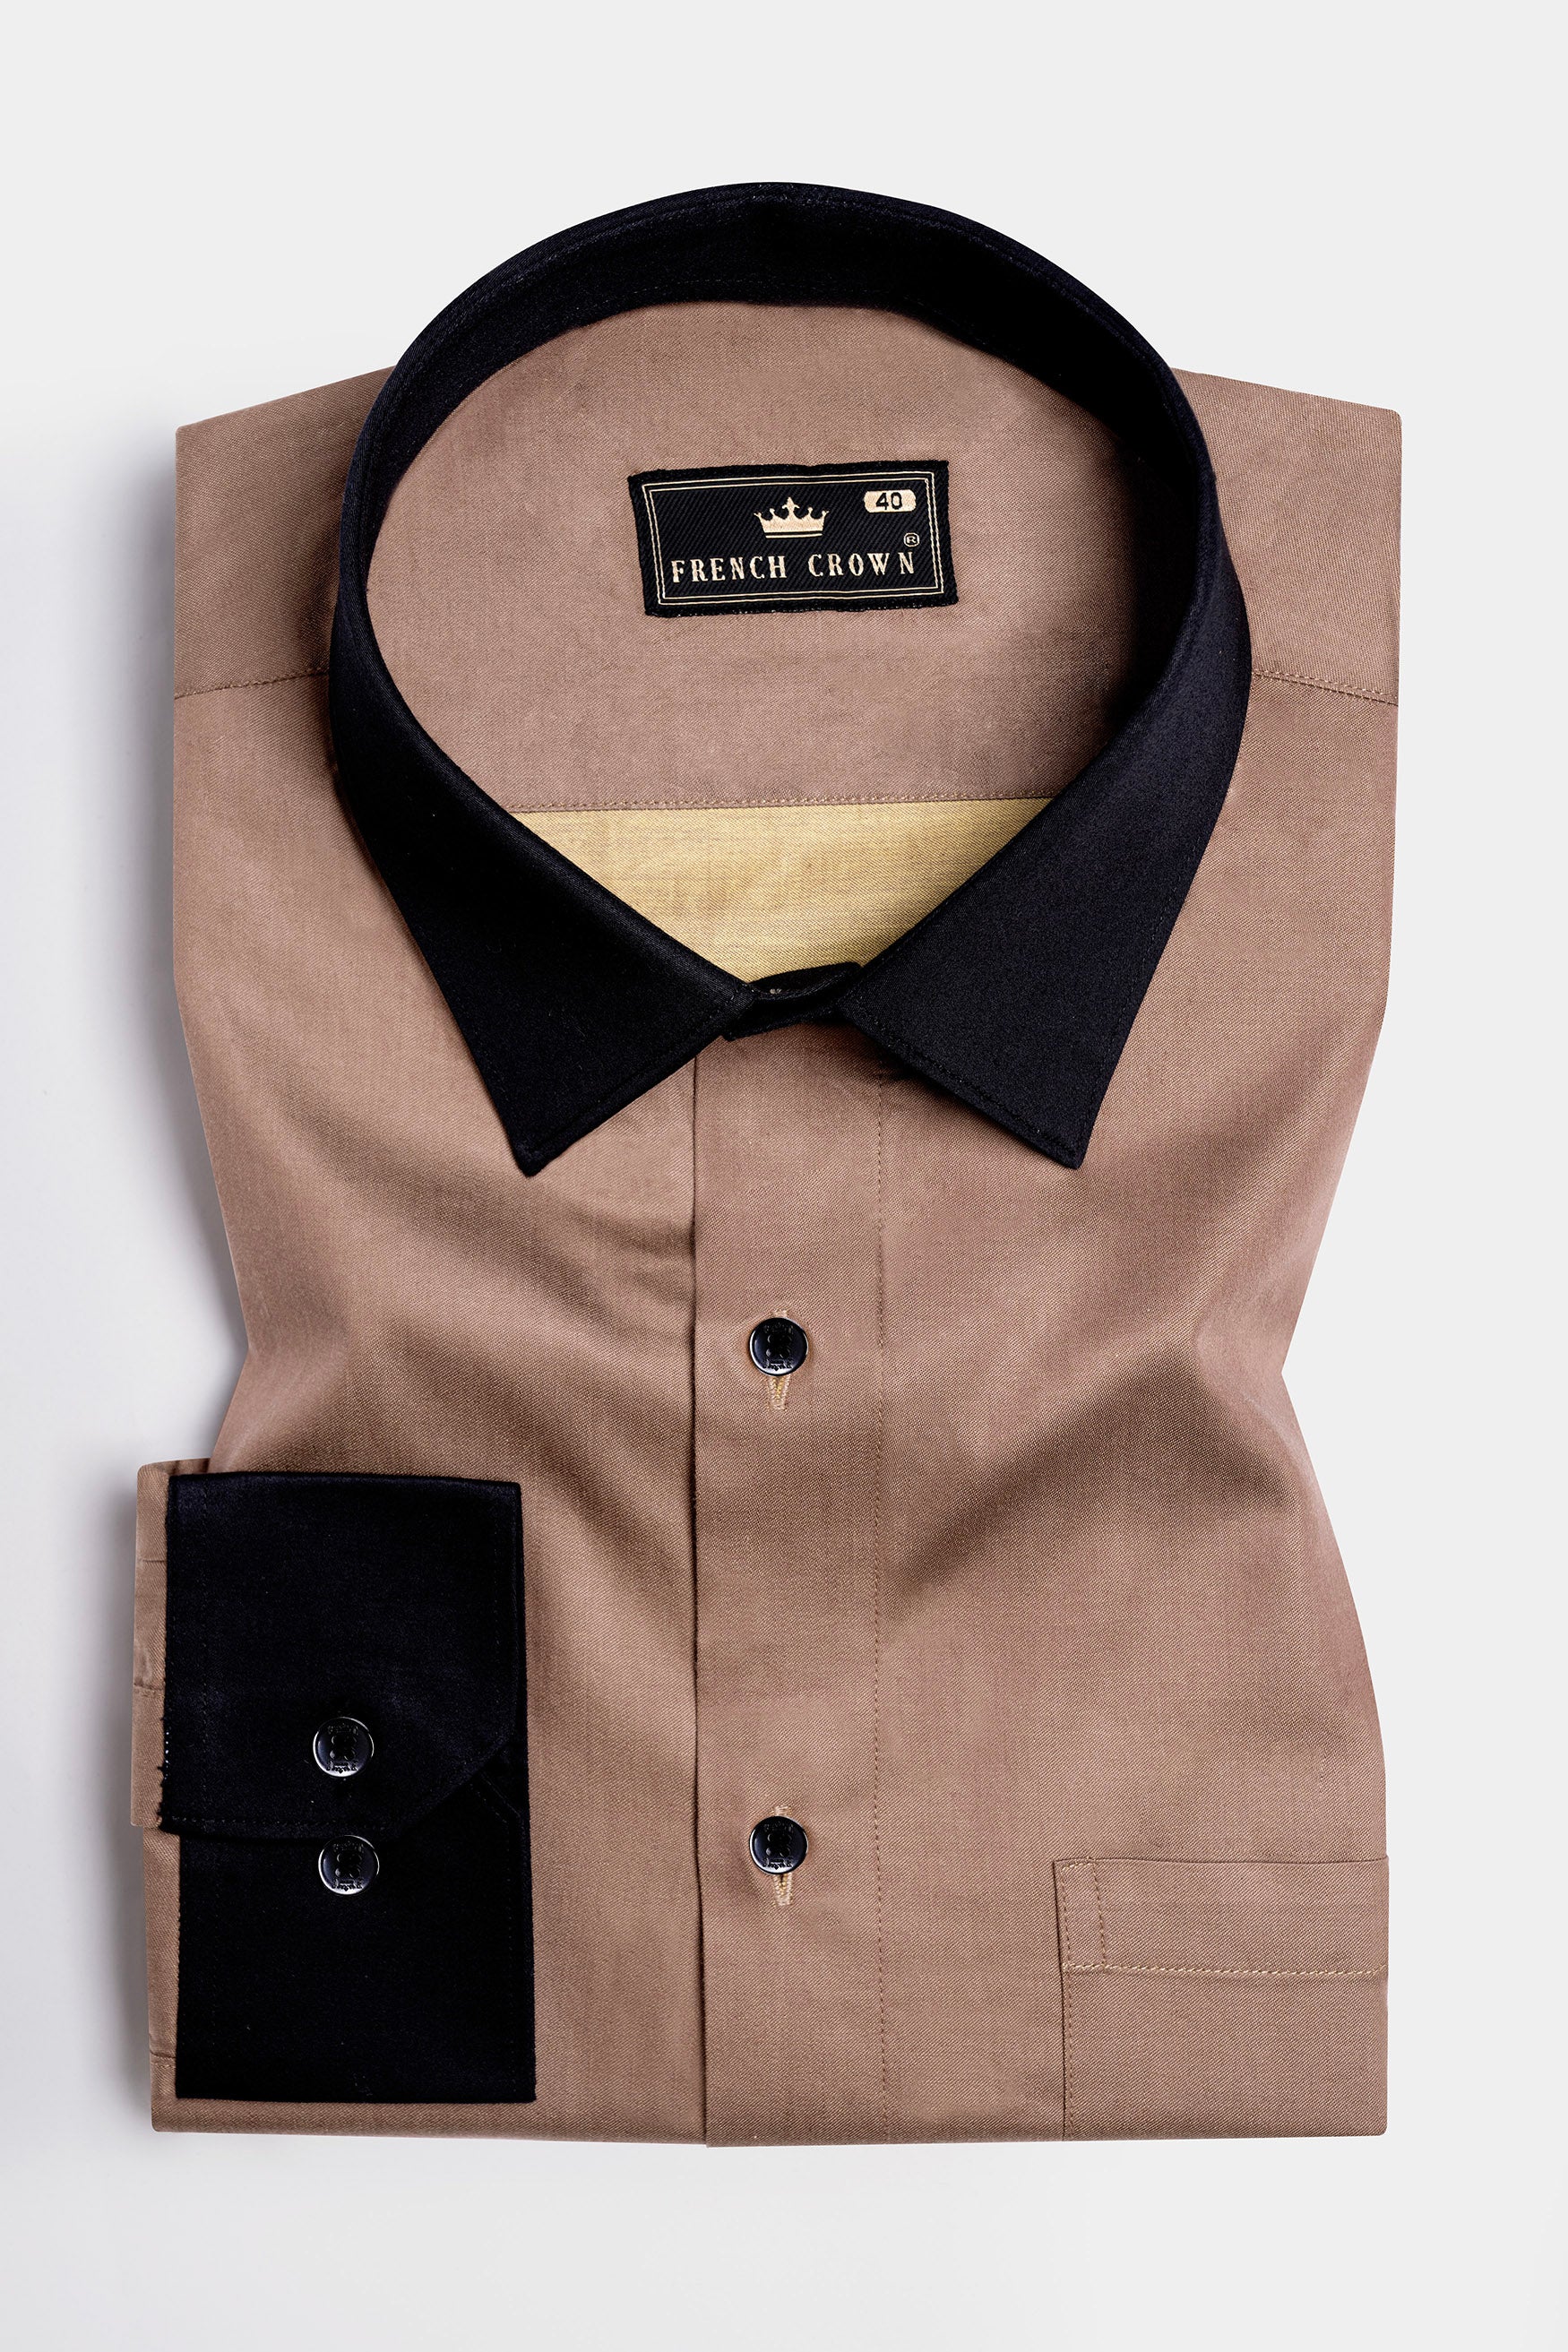 Pharlap Brown with Black Cuffs and Collar Chambray Shirt 11675-BCC-BLK-38, 11675-BCC-BLK-H-38, 11675-BCC-BLK-39, 11675-BCC-BLK-H-39, 11675-BCC-BLK-40, 11675-BCC-BLK-H-40, 11675-BCC-BLK-42, 11675-BCC-BLK-H-42, 11675-BCC-BLK-44, 11675-BCC-BLK-H-44, 11675-BCC-BLK-46, 11675-BCC-BLK-H-46, 11675-BCC-BLK-48, 11675-BCC-BLK-H-48, 11675-BCC-BLK-50, 11675-BCC-BLK-H-50, 11675-BCC-BLK-52, 11675-BCC-BLK-H-52